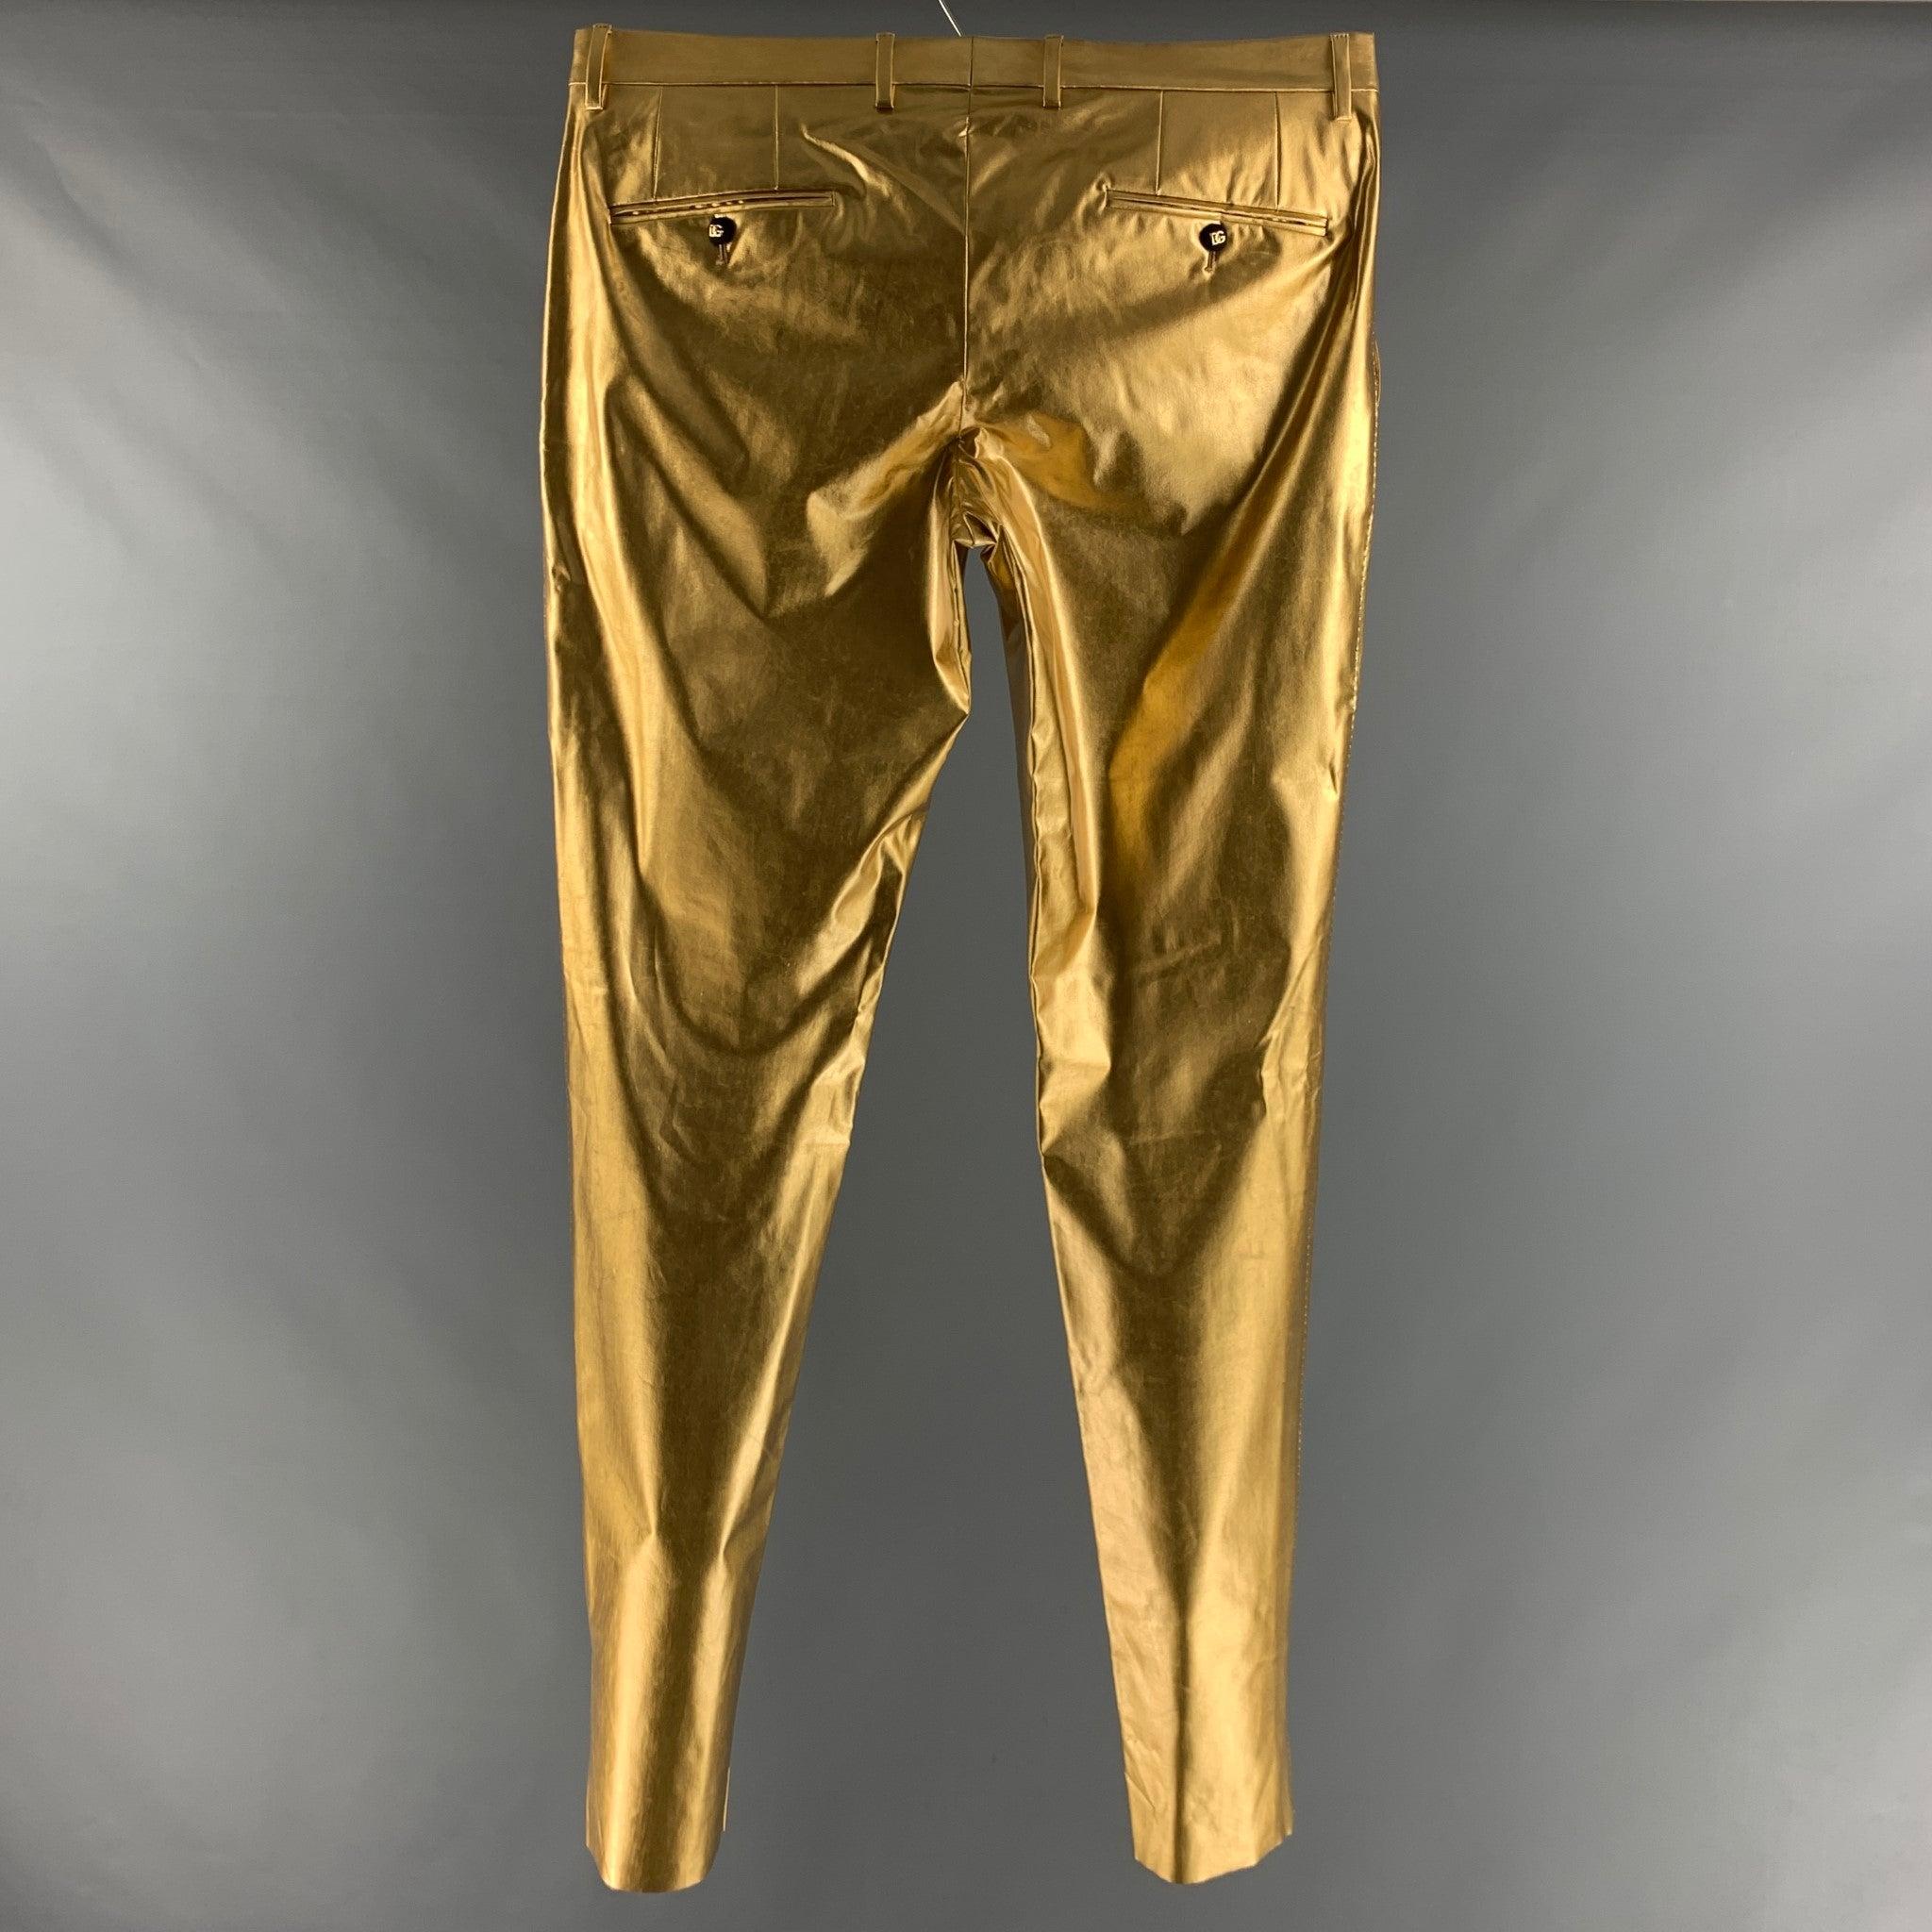 DOLCE & GABBANA Size 36 Gold Metallic Polyamide Elastane Jean Cut Dress Pants In Excellent Condition For Sale In San Francisco, CA